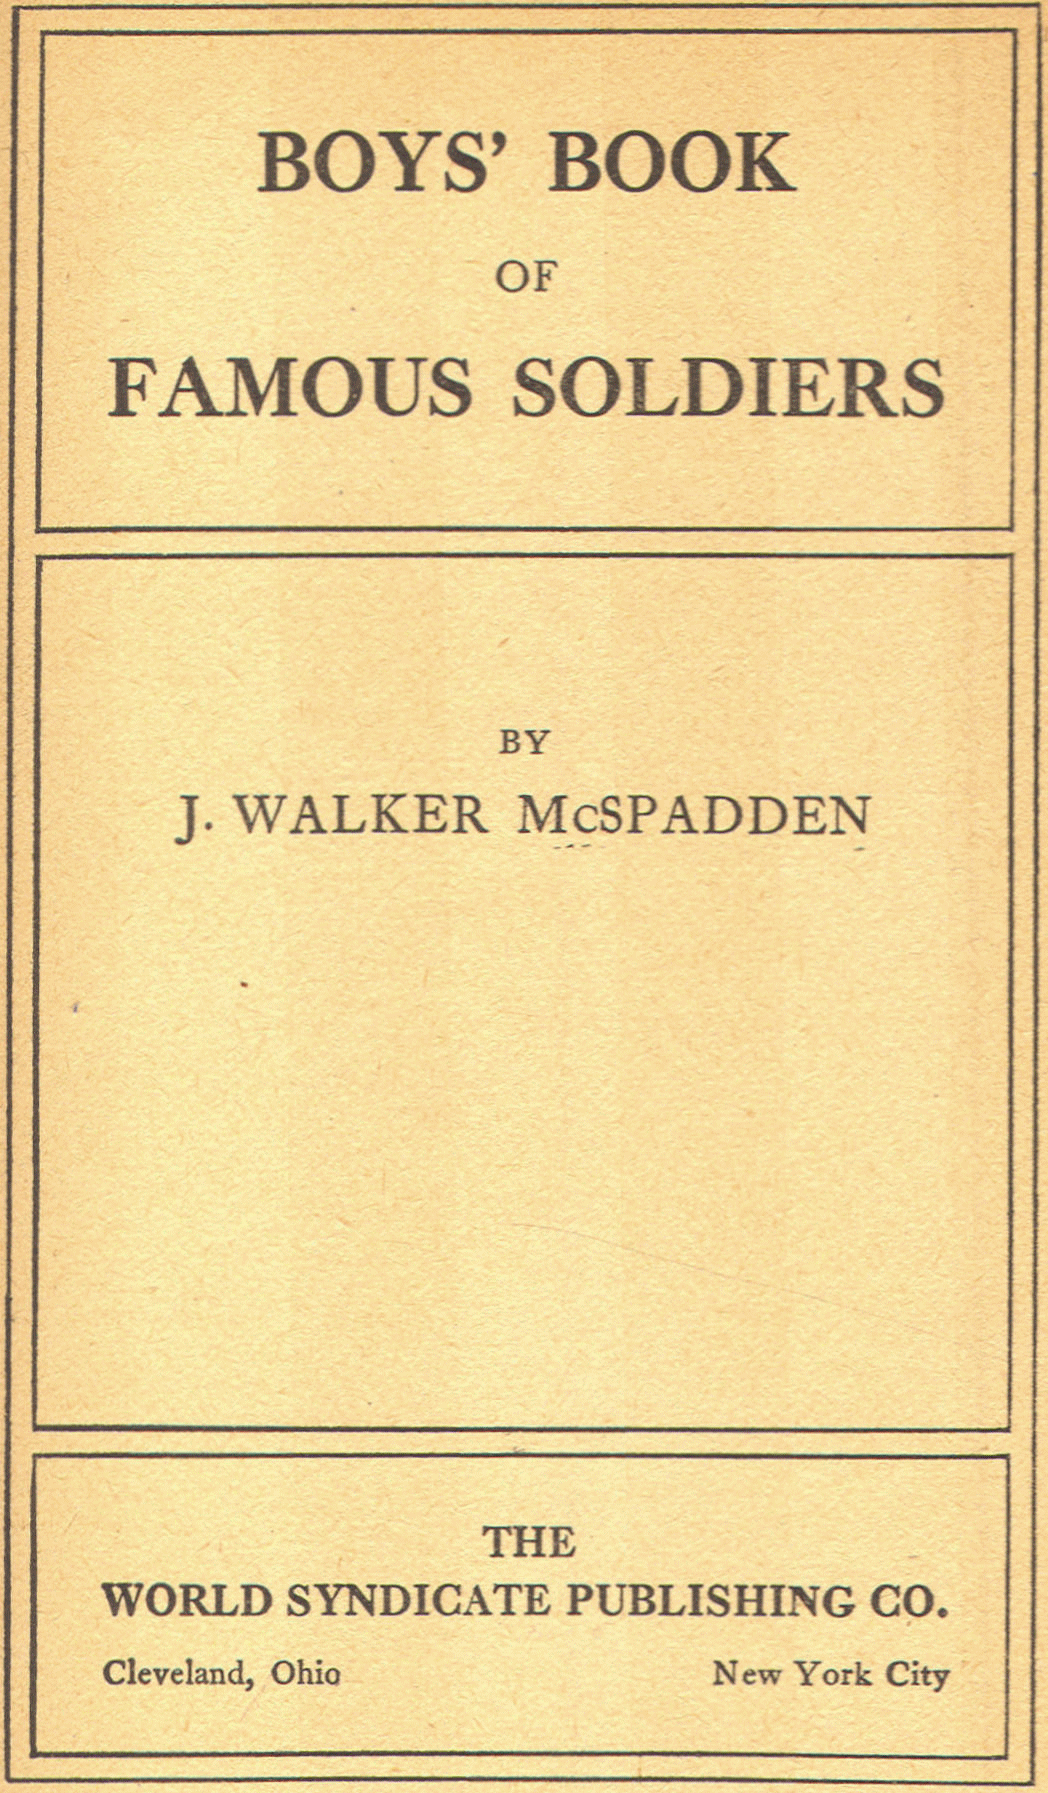 [Title Page] from Book of Famous Soldiers by J. W. McSpadden